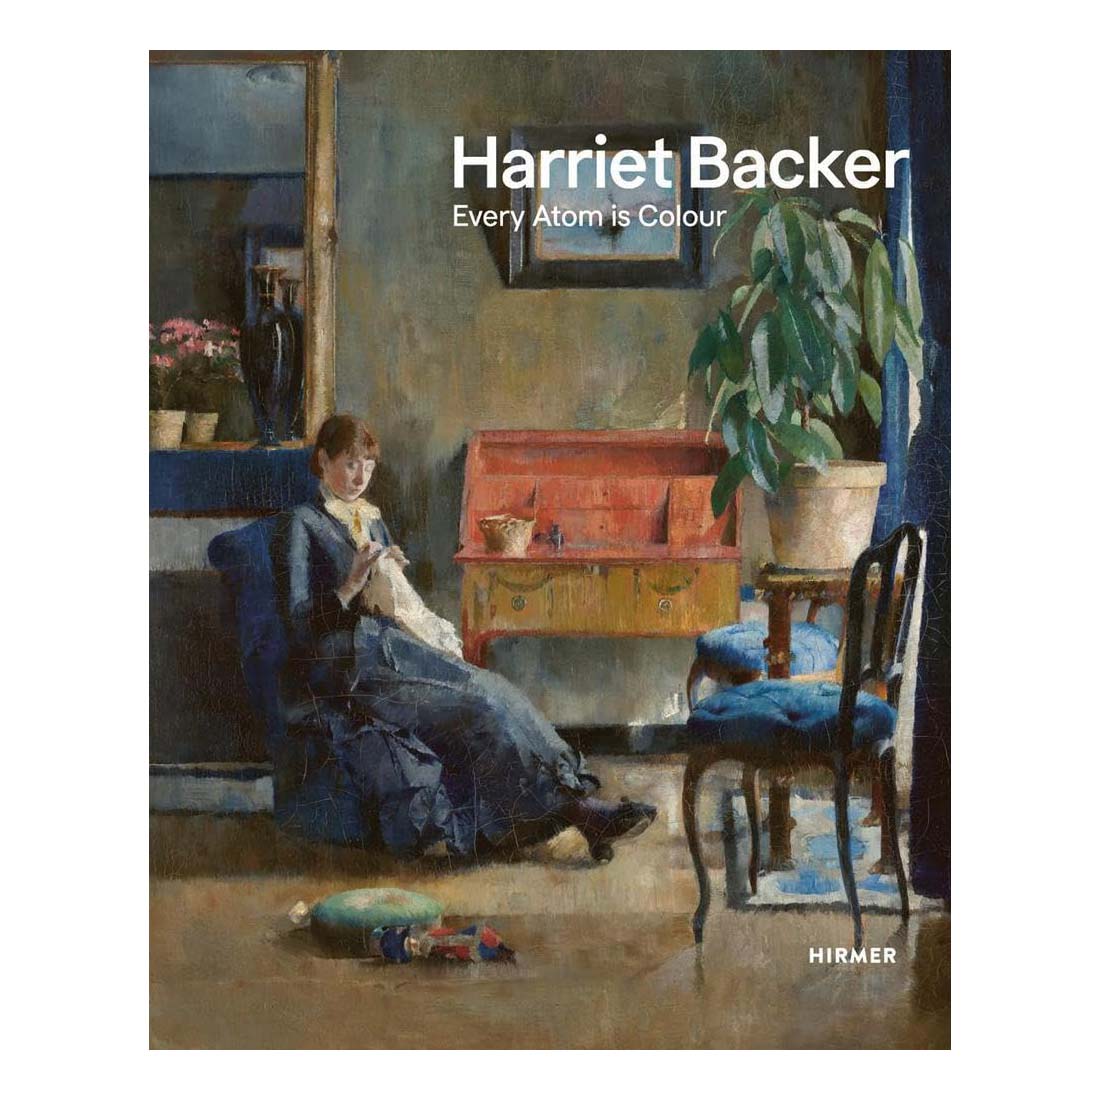 Harriet Backer: Every Atom is Colour